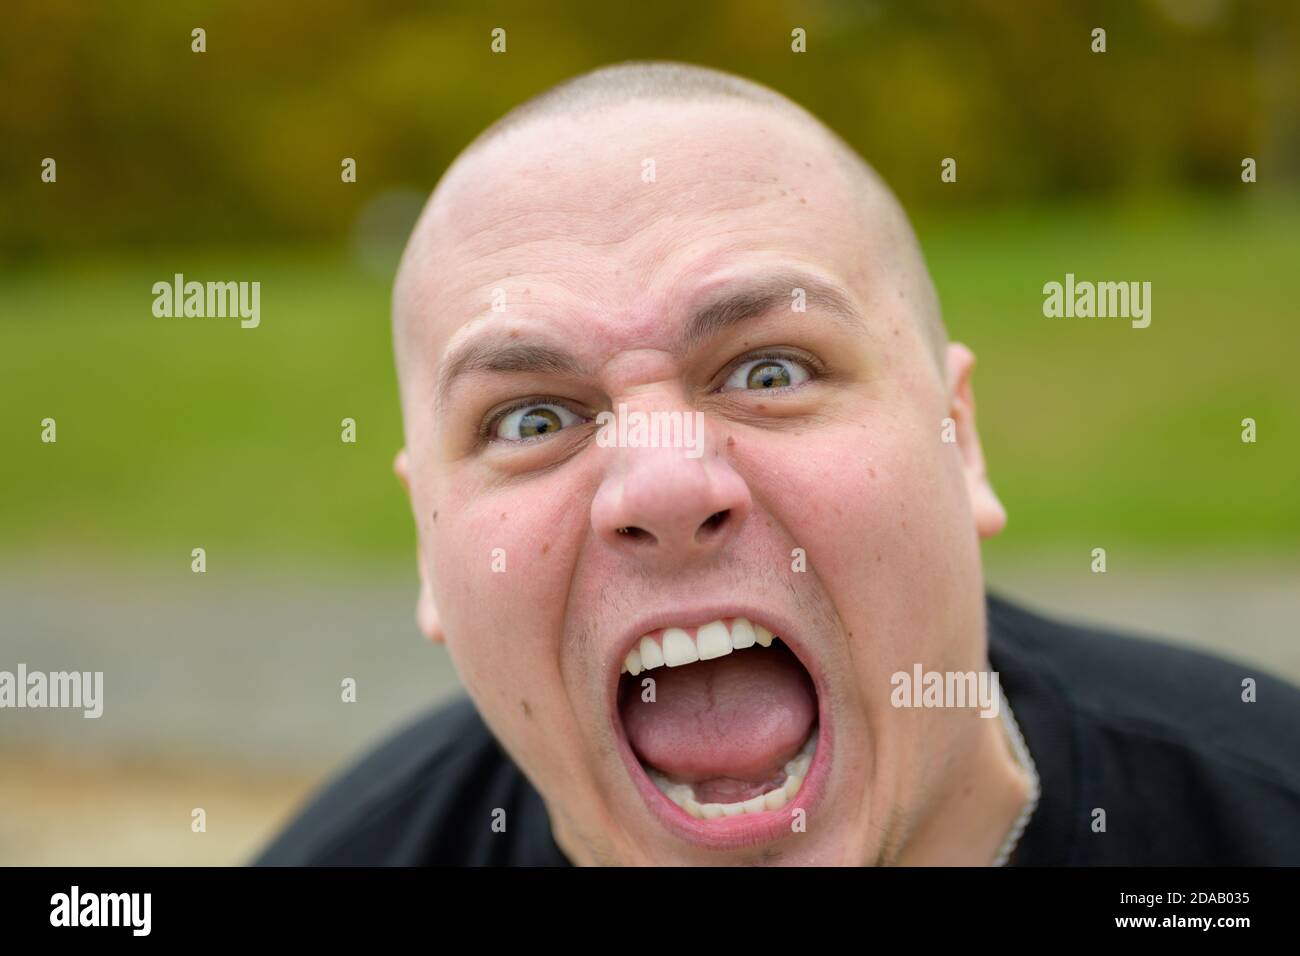 Young man with shaved head asserting his dominance yelling threateningly at the camera in frustration outdoors in a park Stock Photo